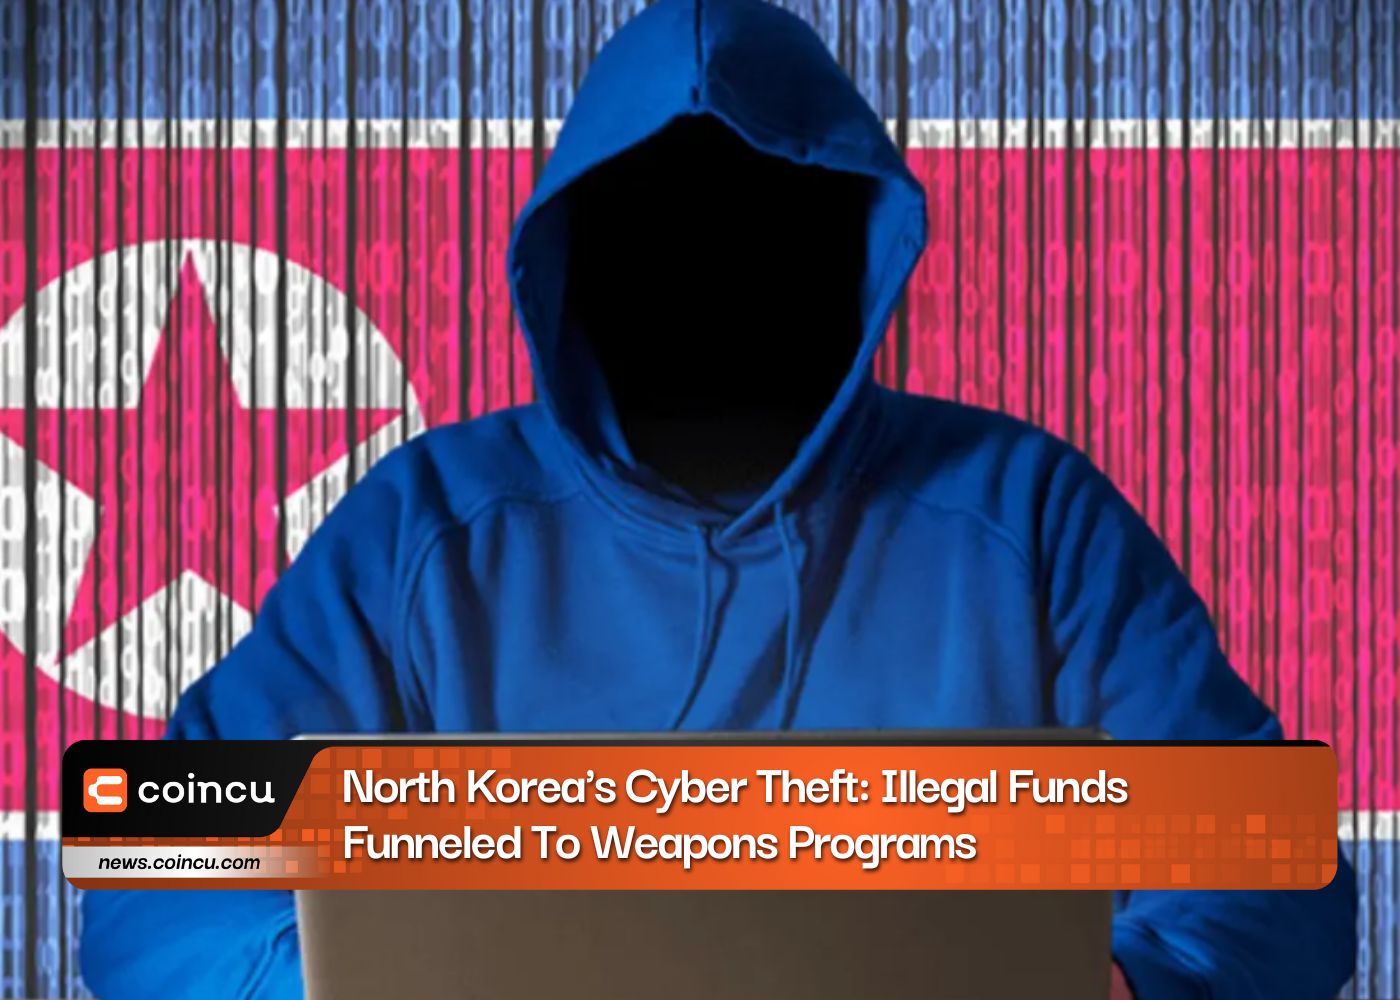 North Korea's Cyber Theft: Illegal Funds Funneled To Weapons Programs